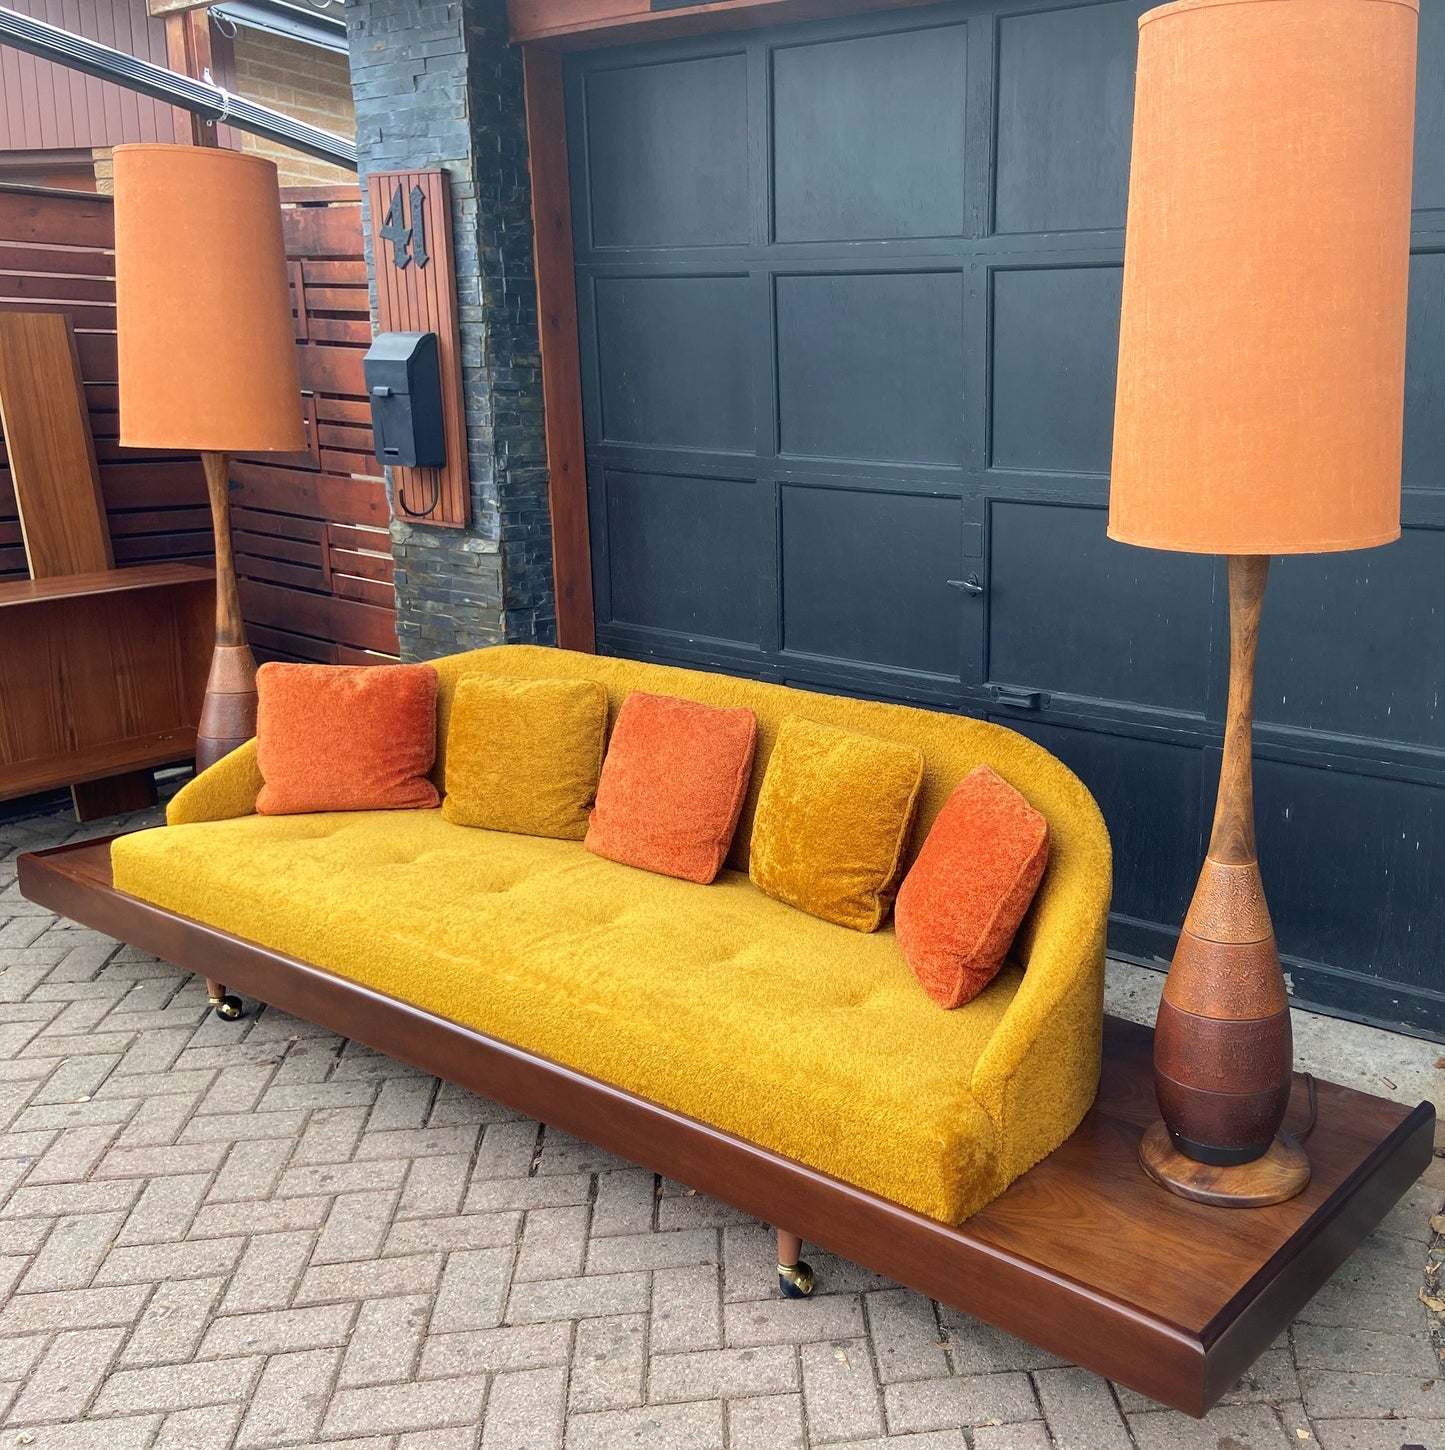 MCM Cloud Platform Sofa in Walnut & Mohair attributed to Adrian Pearsall 121"